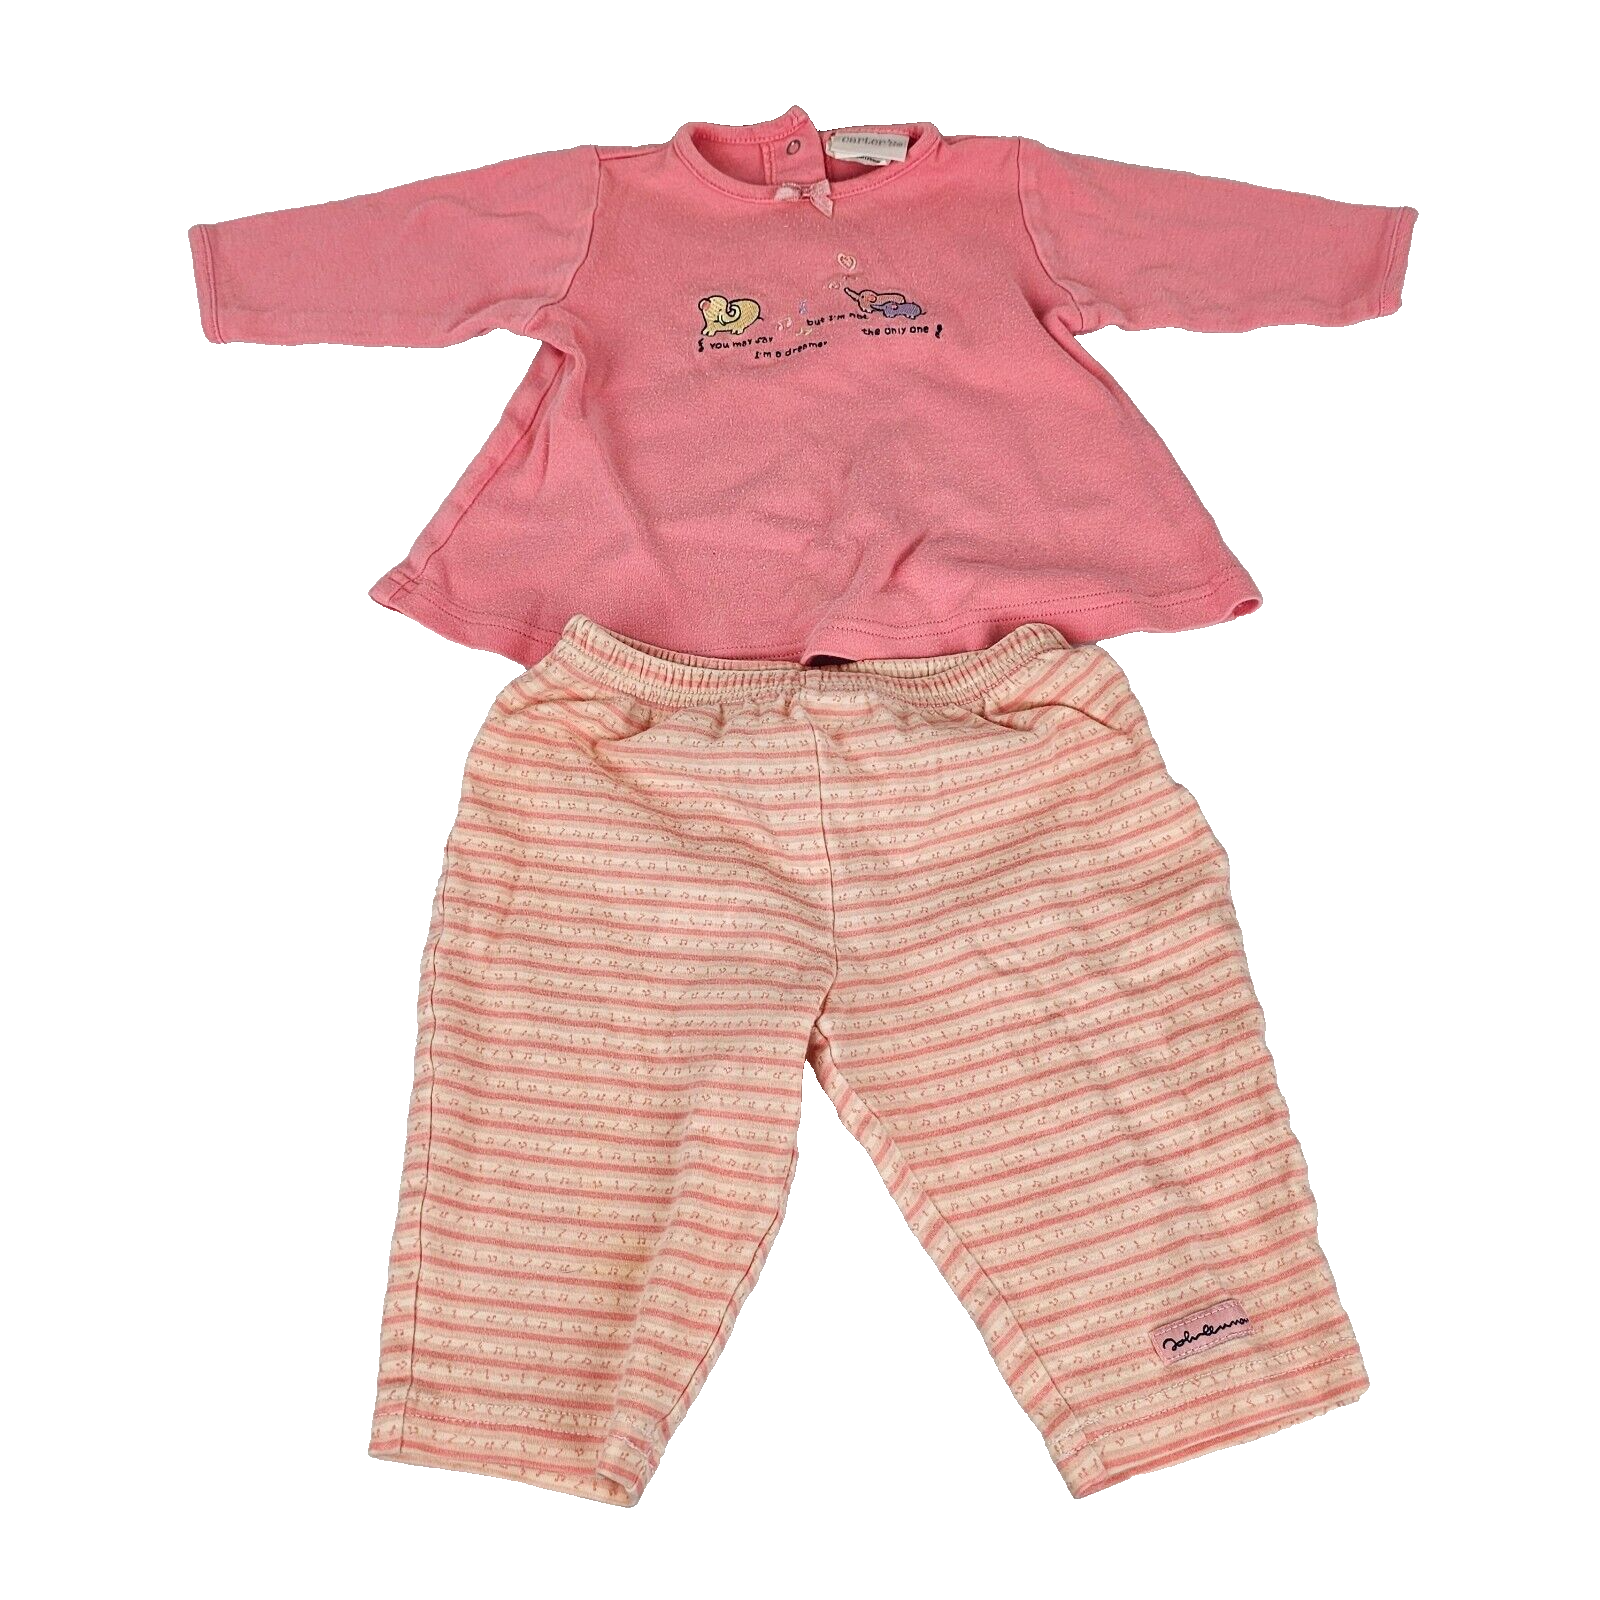 Primary image for Baby Girl Clothes Carter's 3-6 Month Vintage John Lennon 2pc Pink Set Outfit